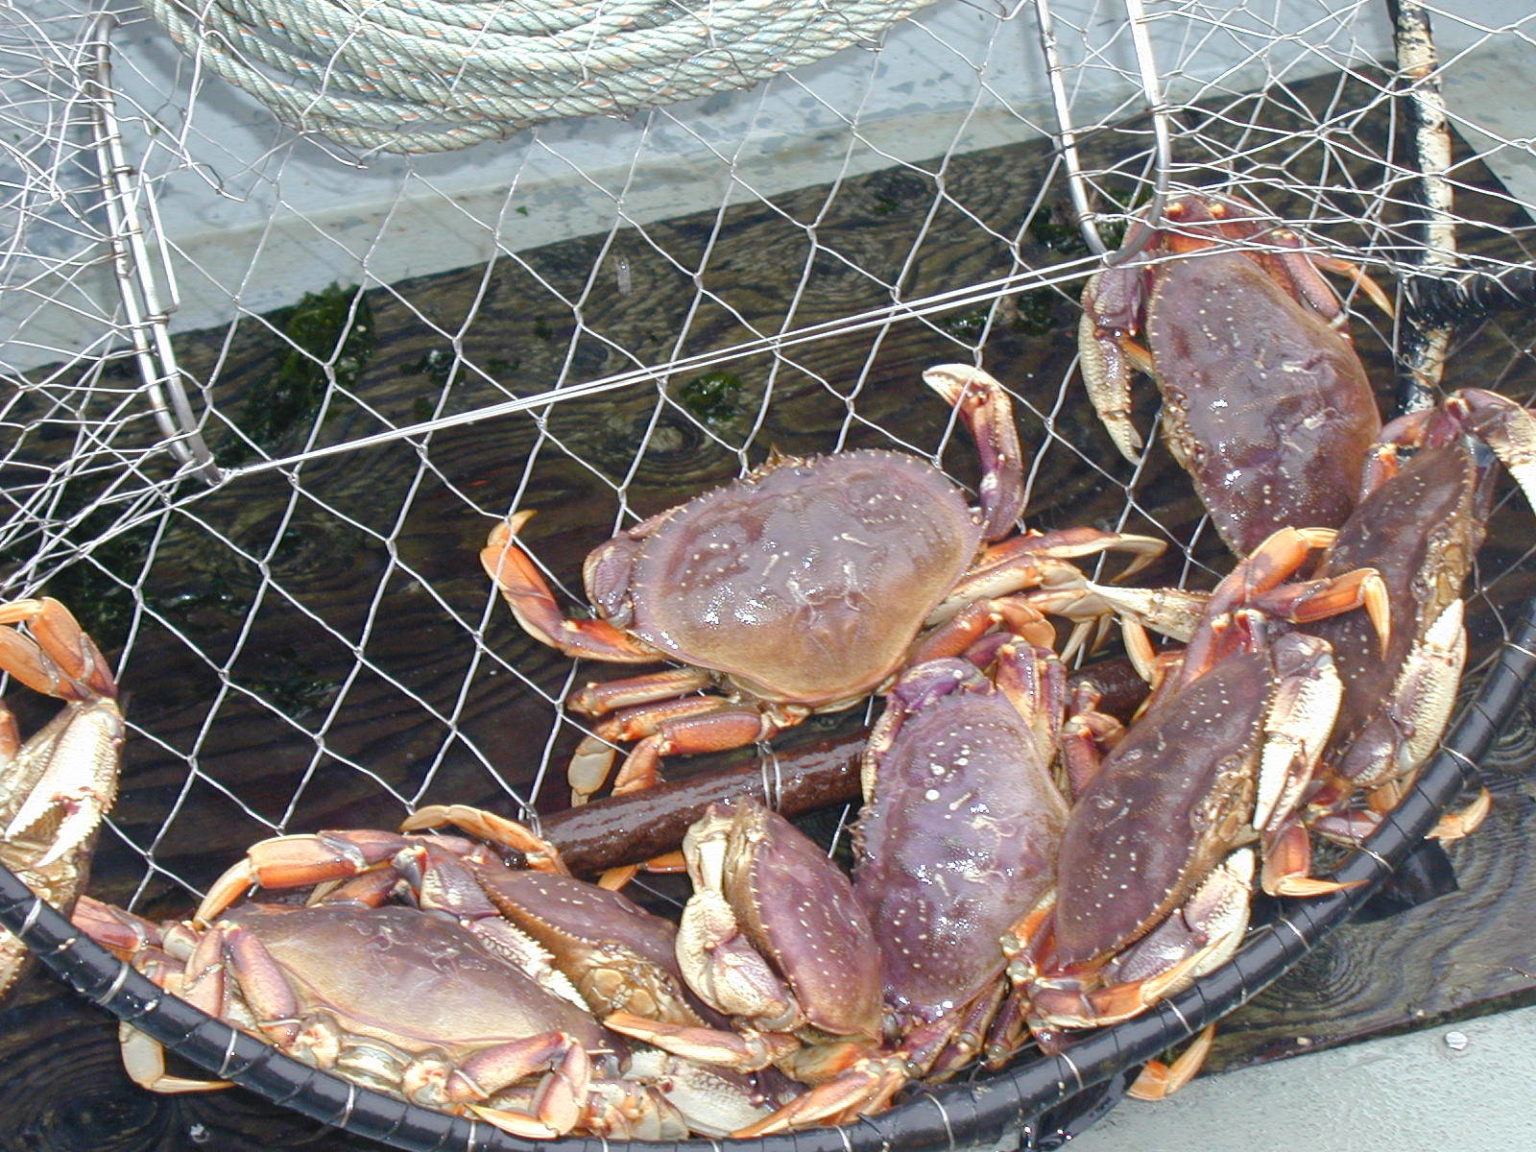 Applications sought for WDFW’s Puget Sound Recreational Crab and Shrimp